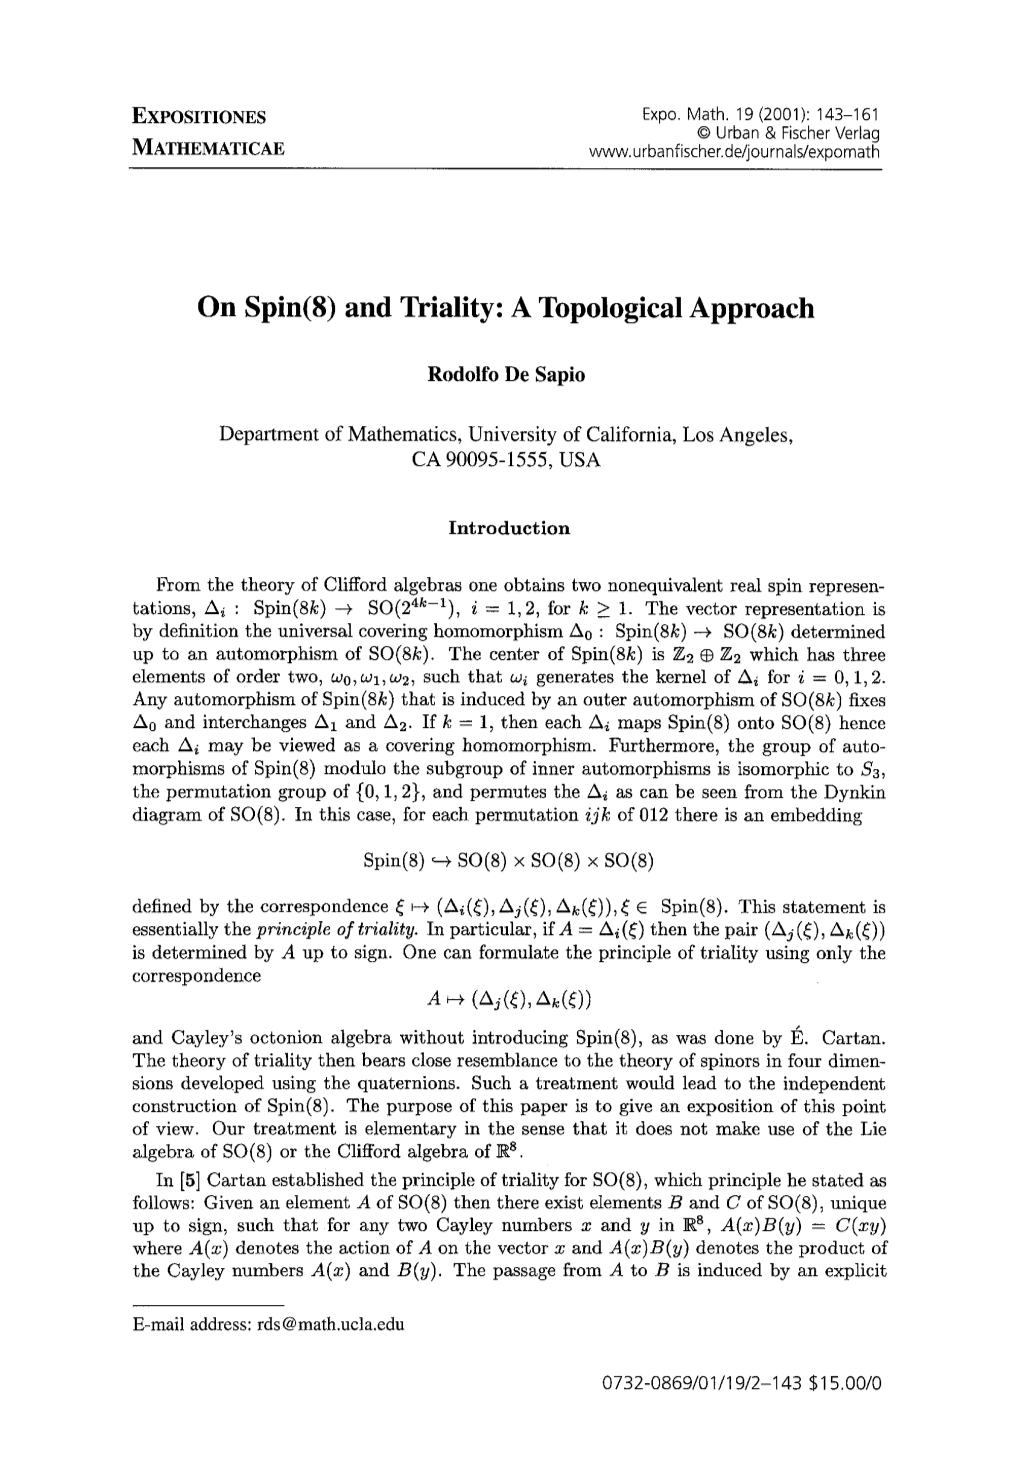 On Spin(8) and Triality: a Topological Approach